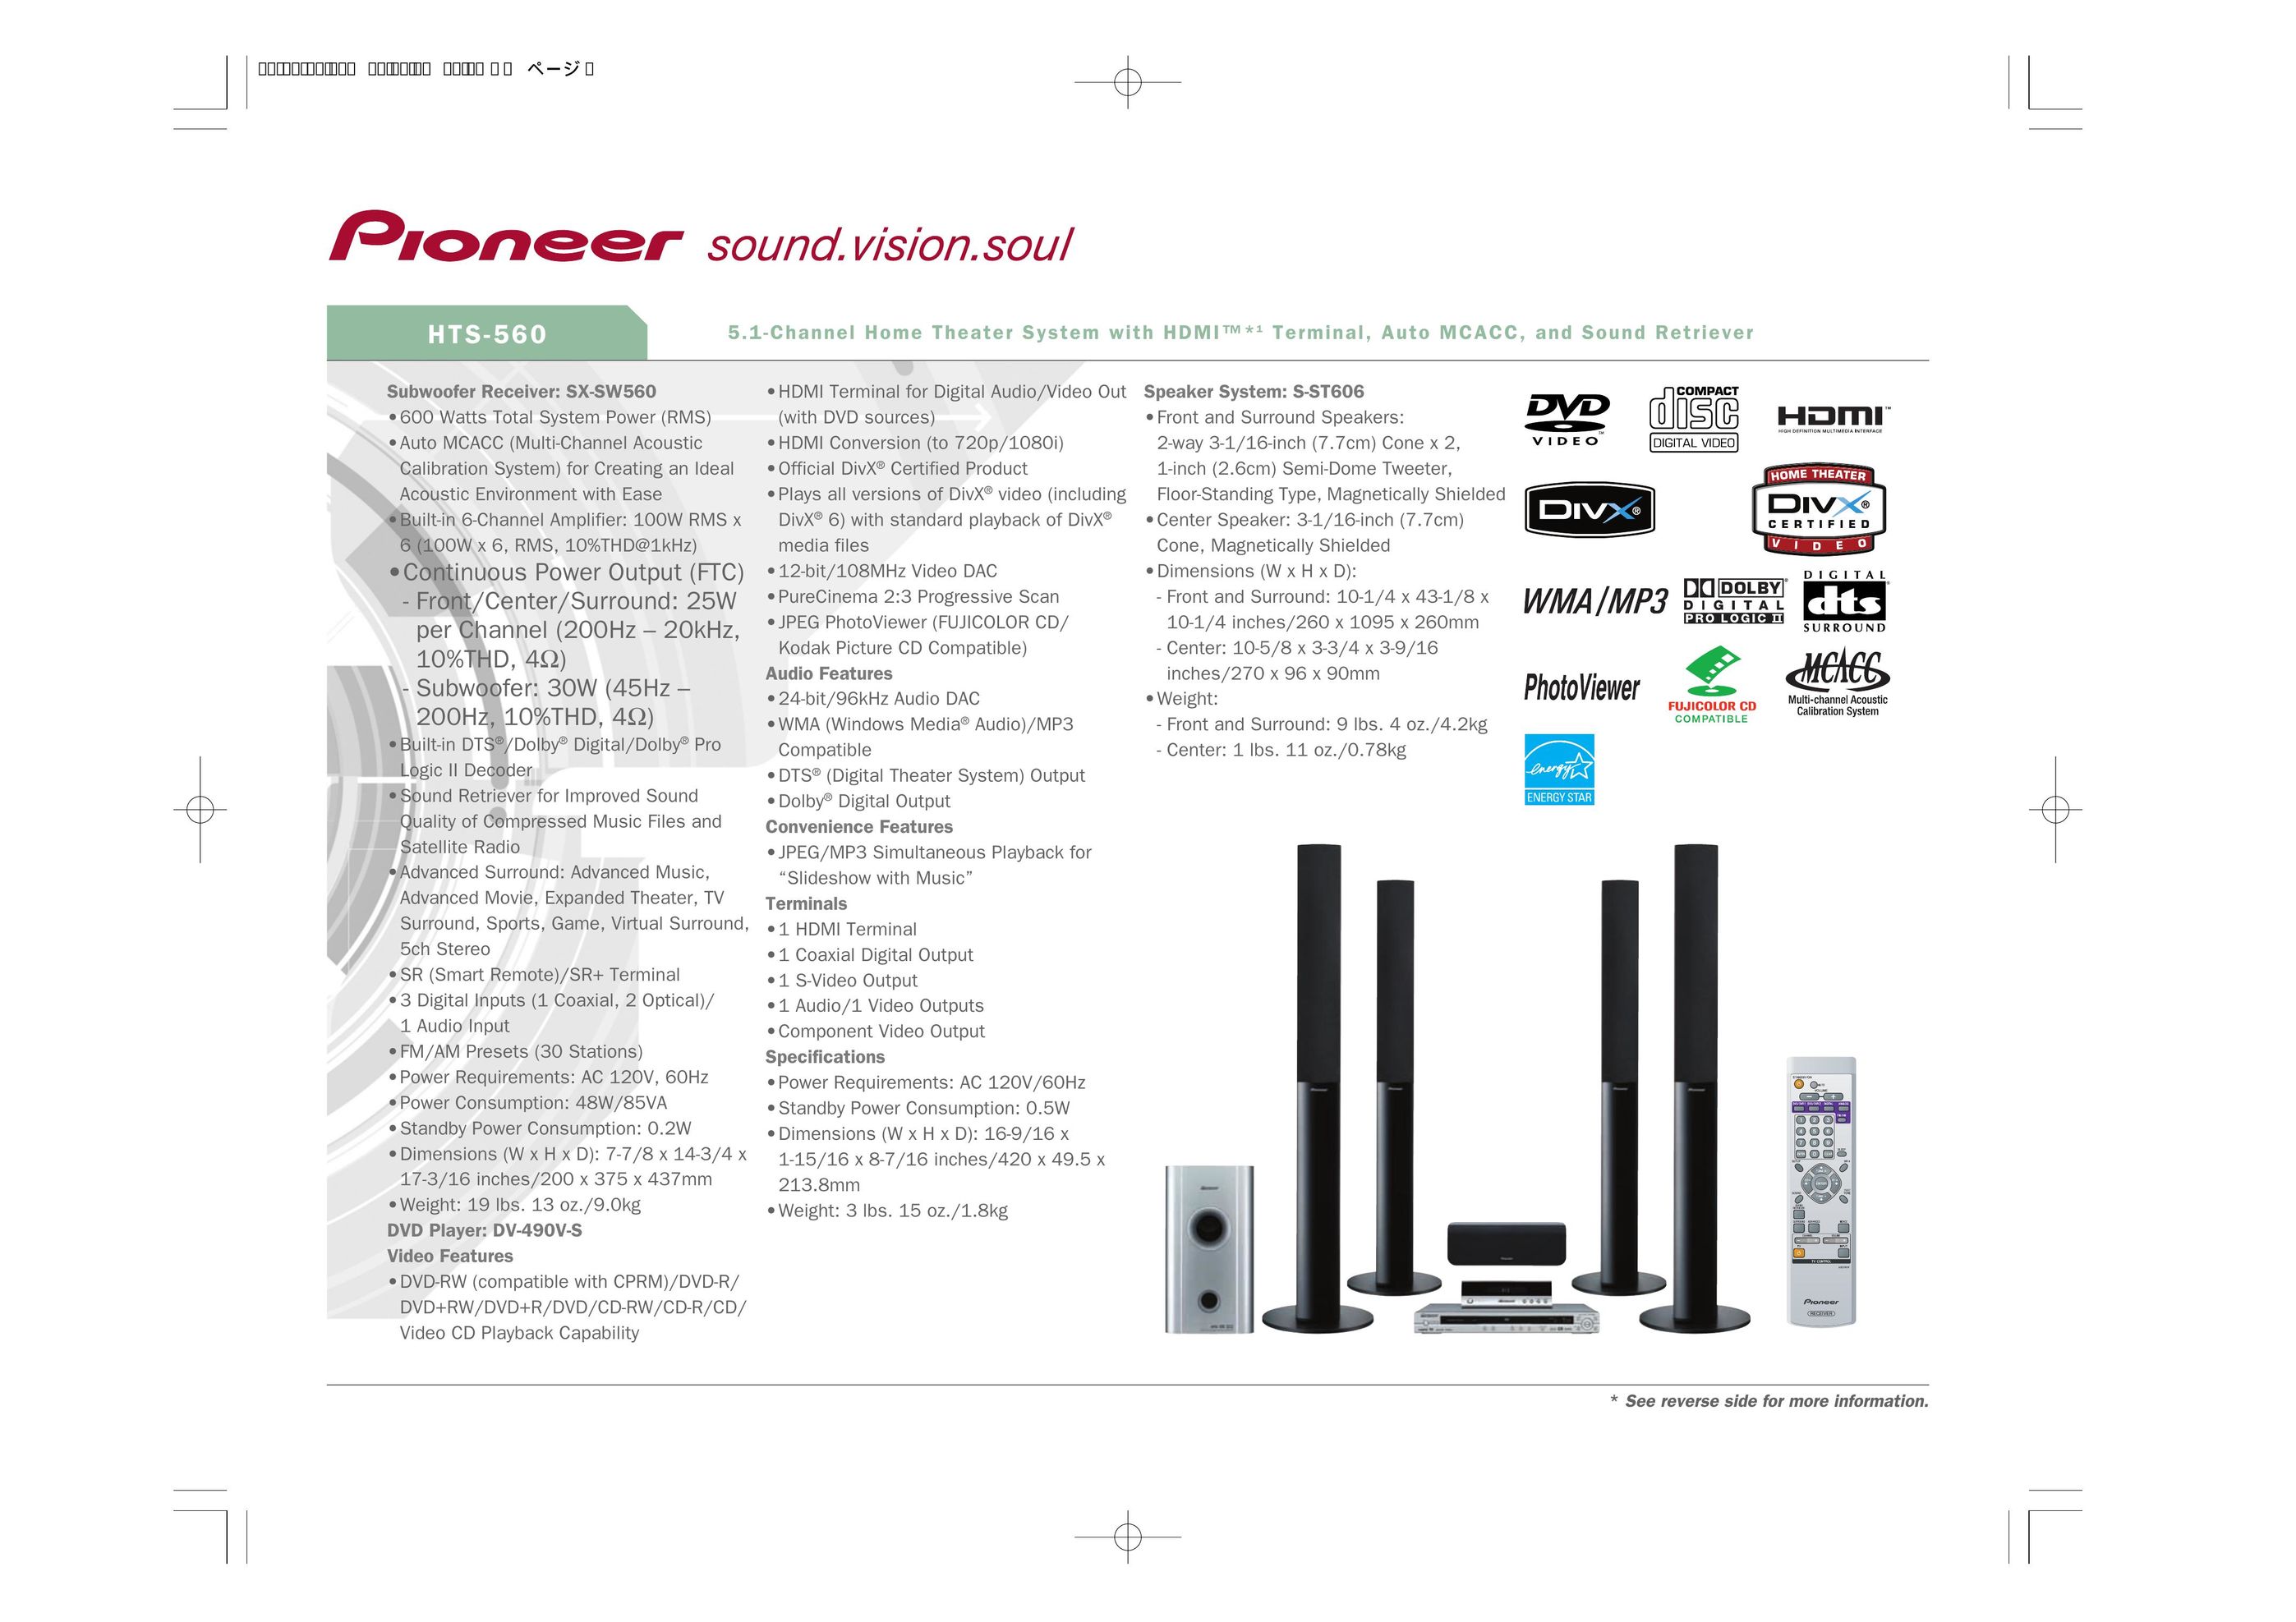 Pioneer HTS-560 Home Theater System User Manual